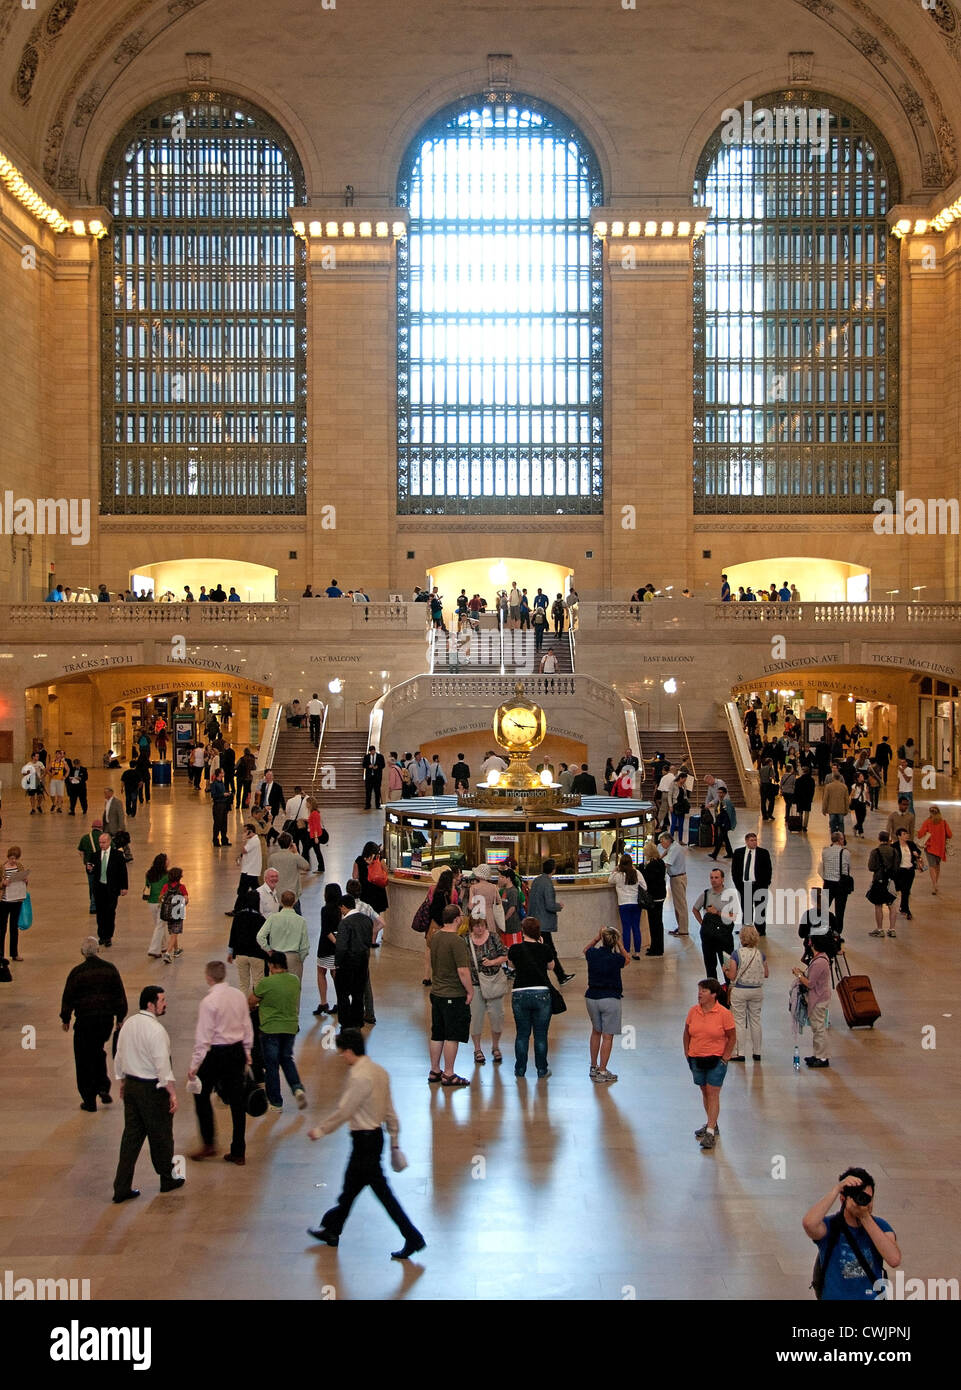 Grand Central Terminal, Grand Central Station, Grand Central, terminal dei treni per pendolari situato in 42nd Street e Park Avenue, Manhattan, New York City. Foto Stock